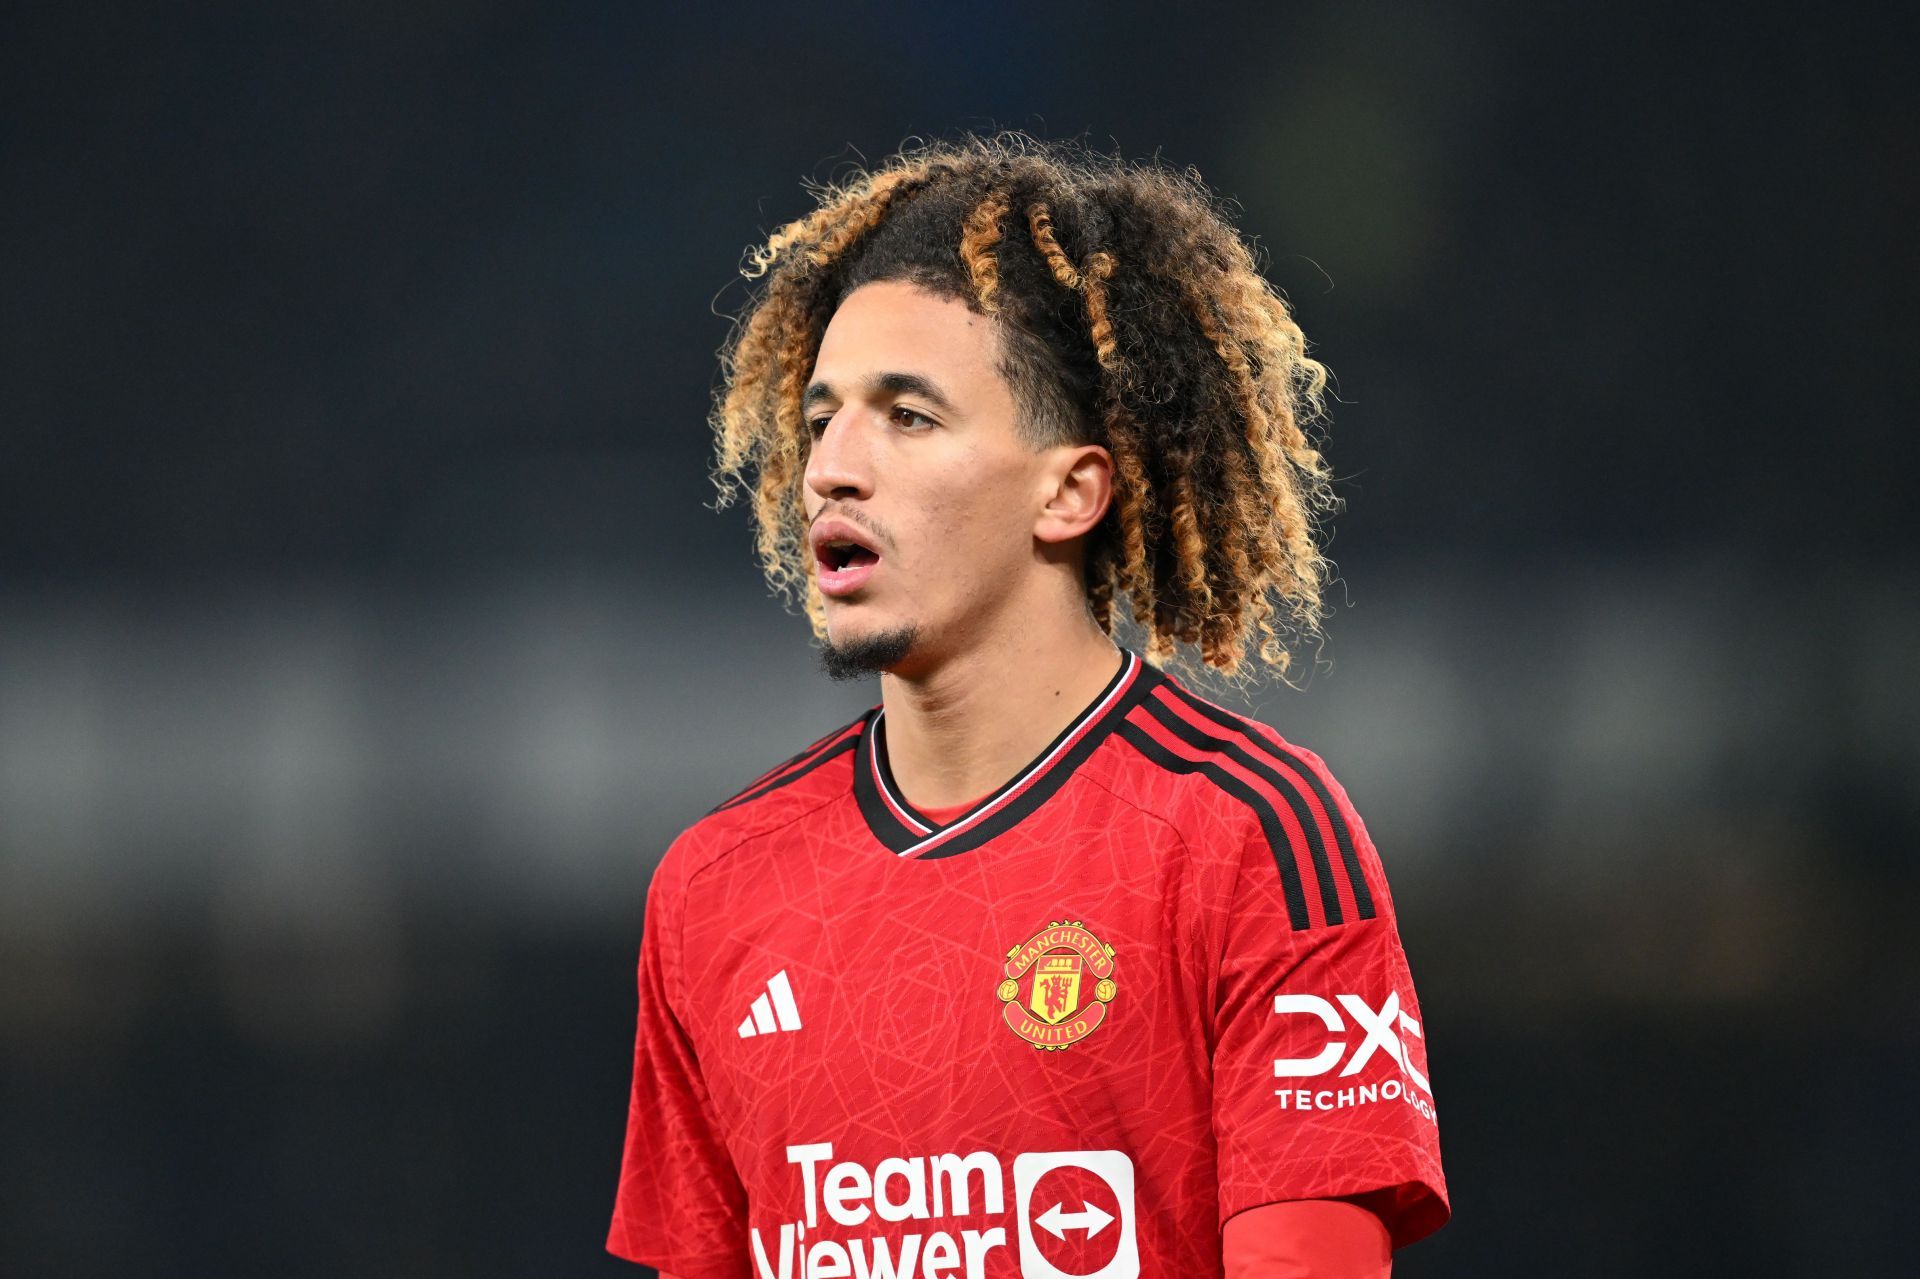 Hannibal Mejbri is set to leave Old Trafford this month.